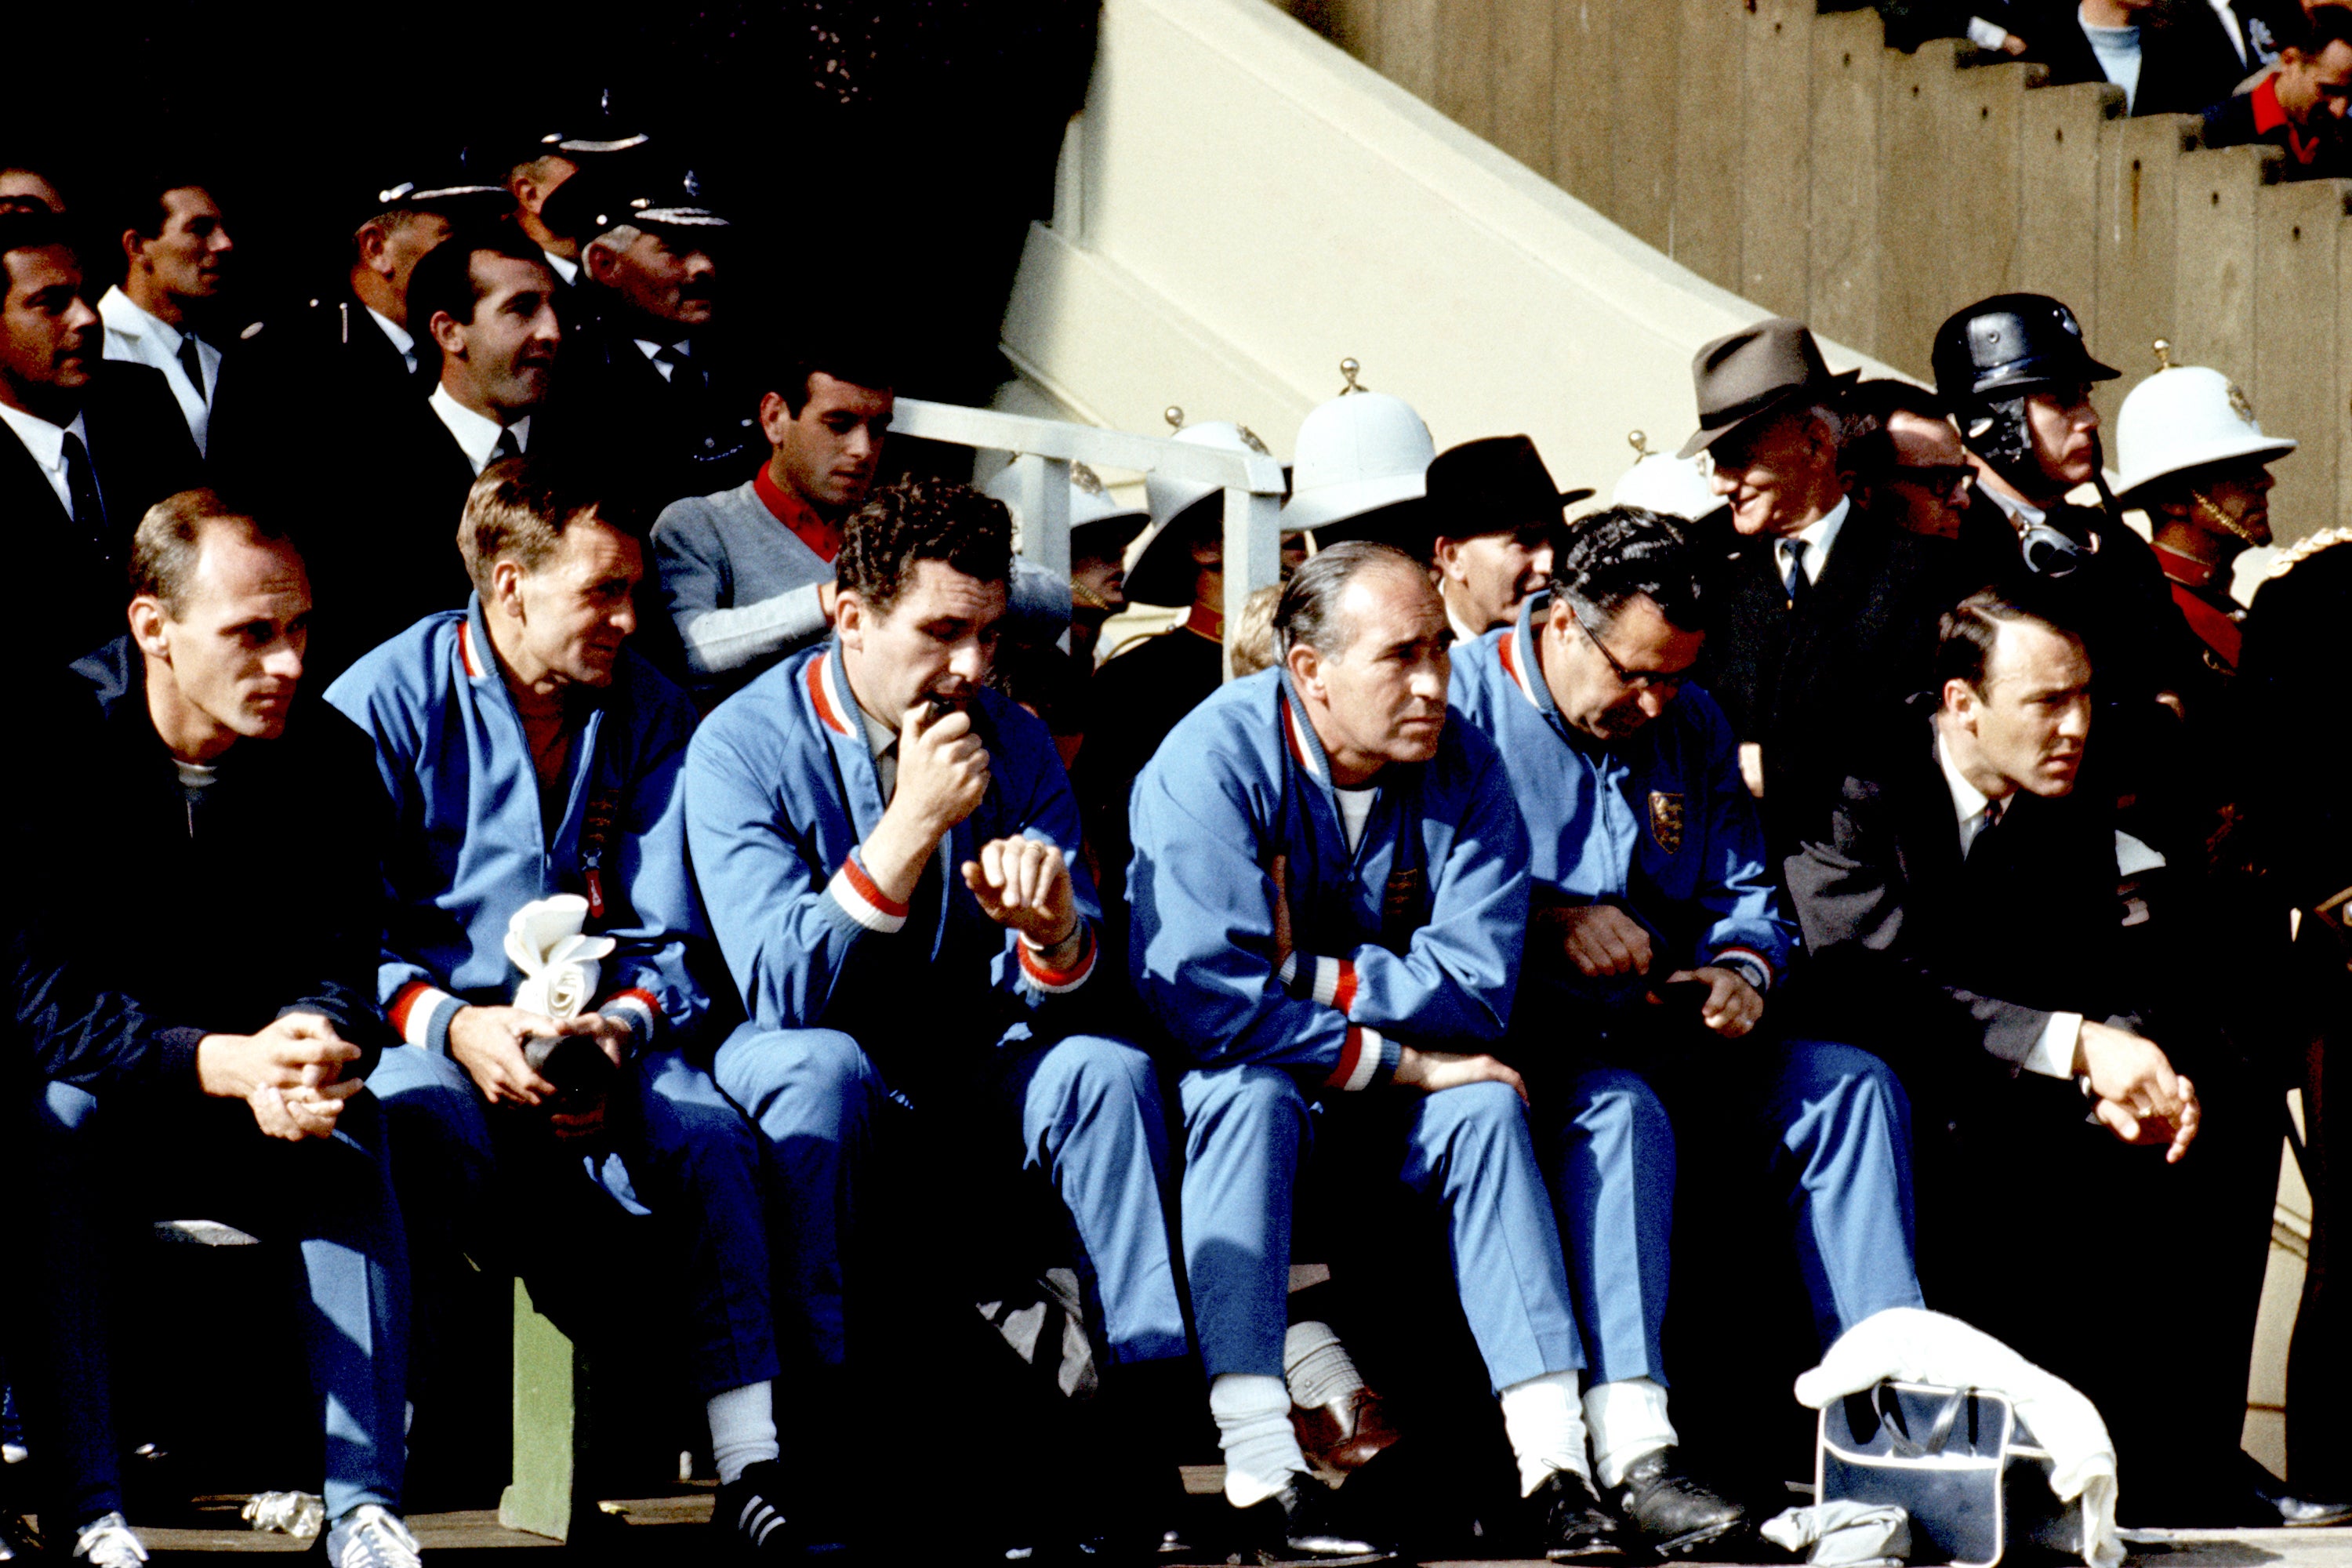 Jimmy Greaves, right, watched the World Cup final from England’s bench (PA)